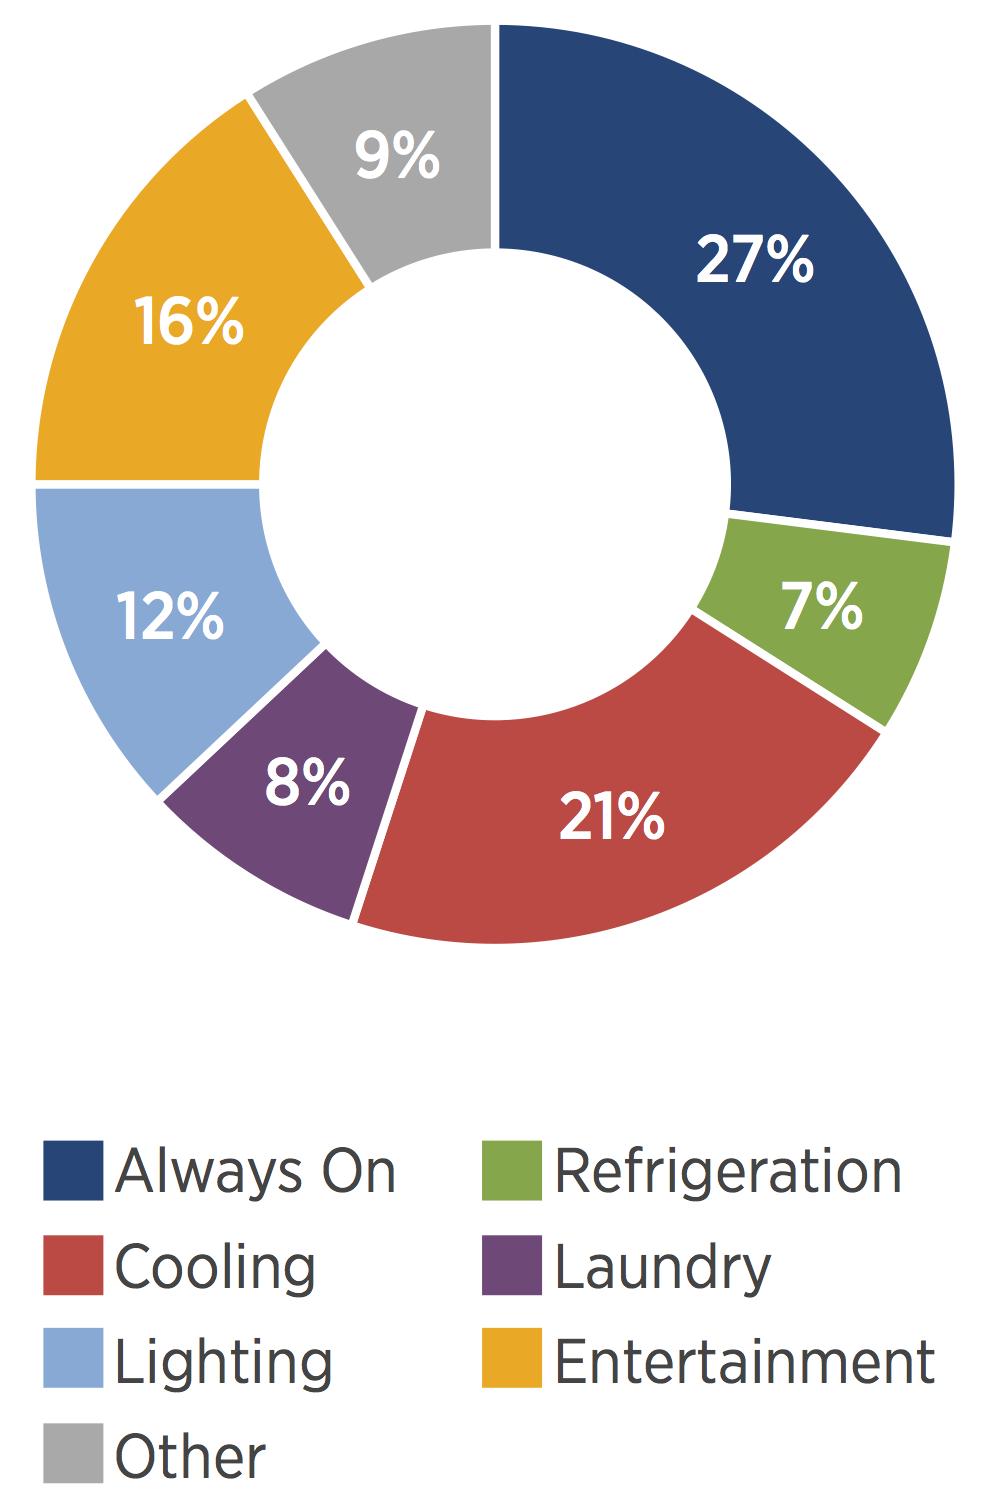 portion of their consumption. Unfortunately, in these scenarios the opportunity to educate customers on appliances that are not disaggregated is lost.